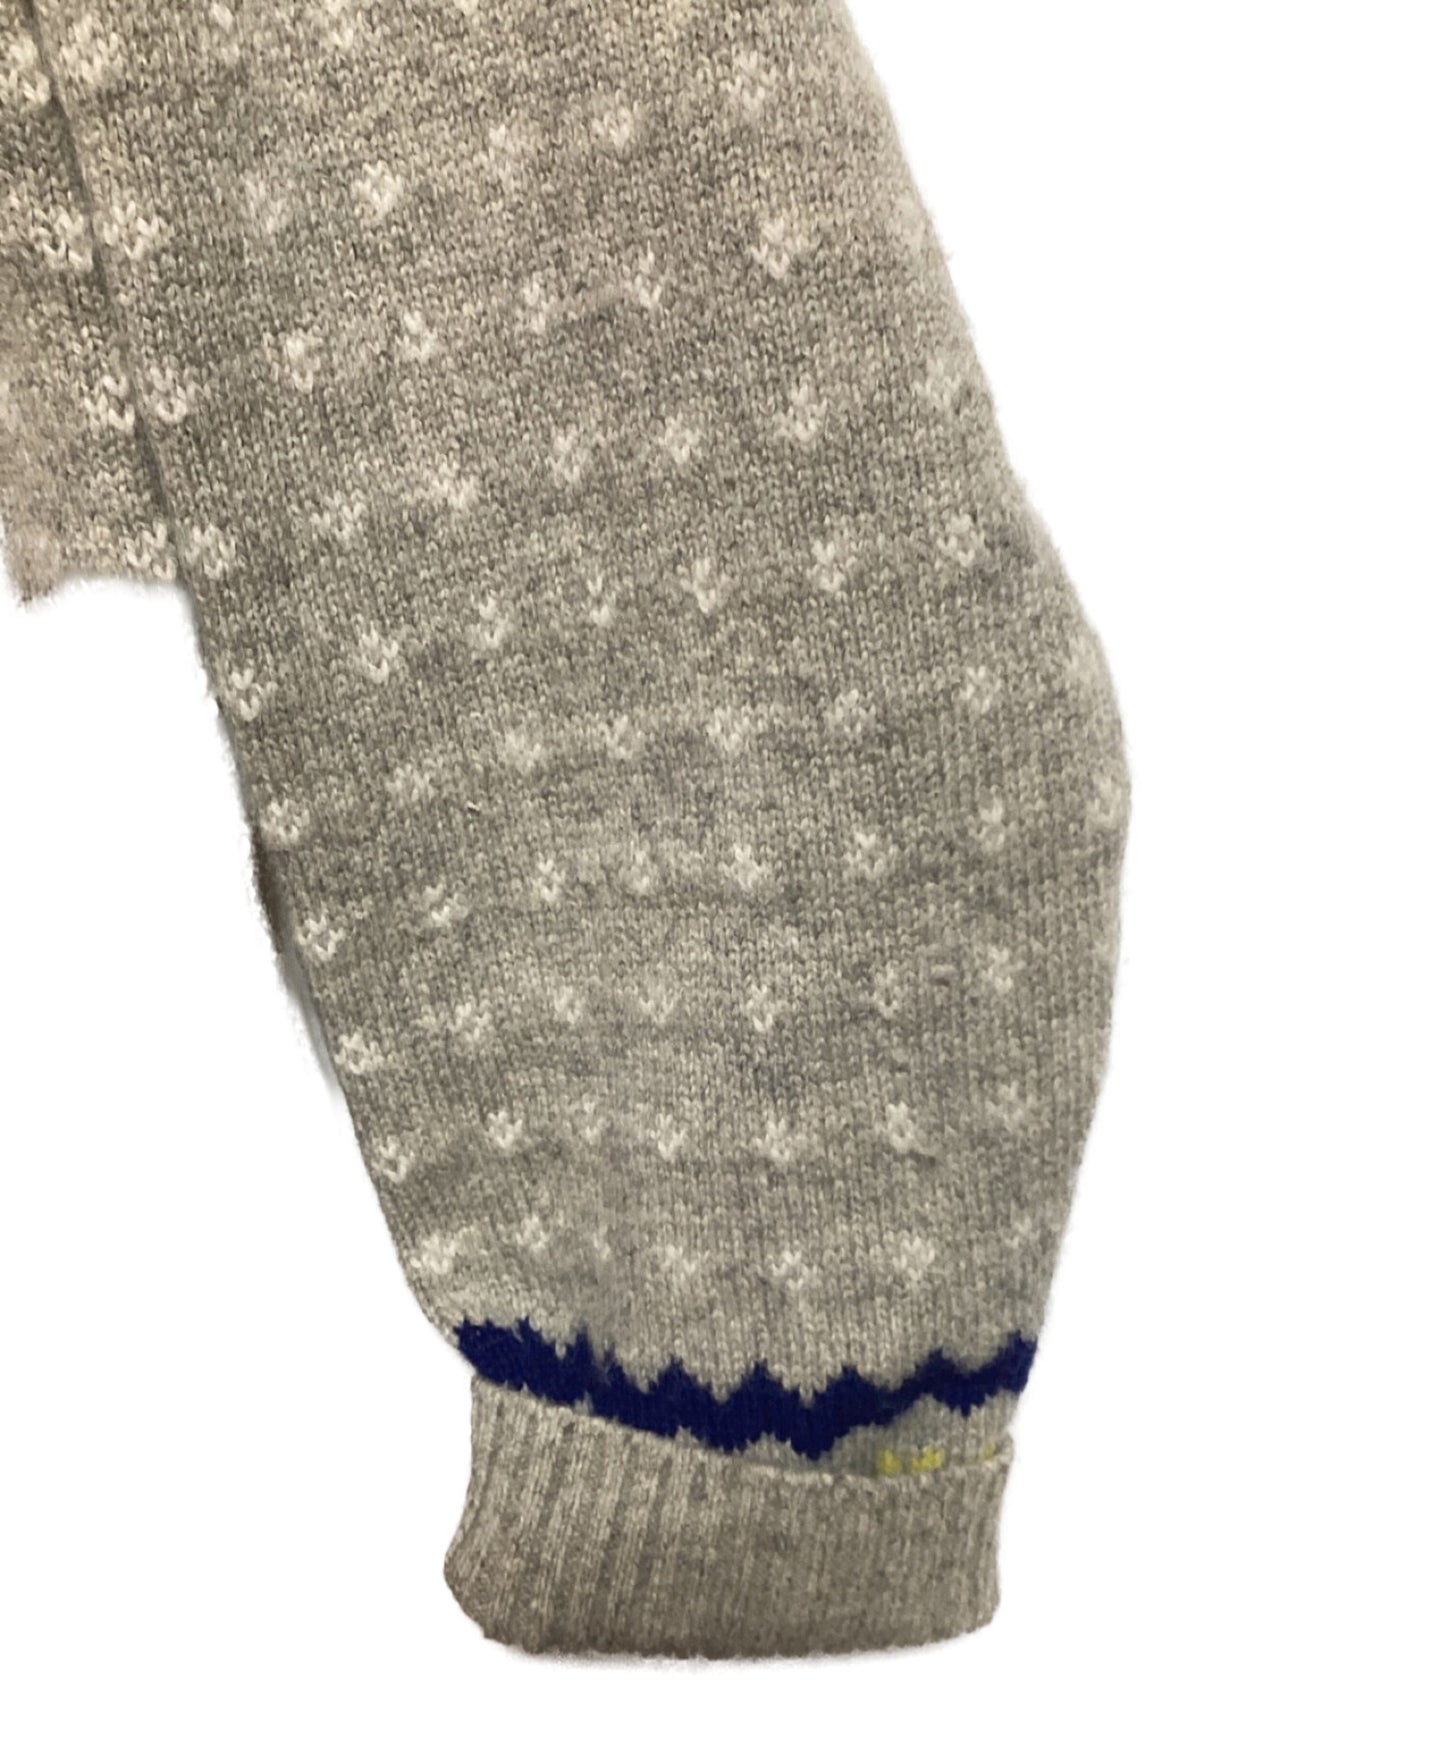 [Pre-owned] HUMAN MADE Nordic Jacqurd Knit Sweater